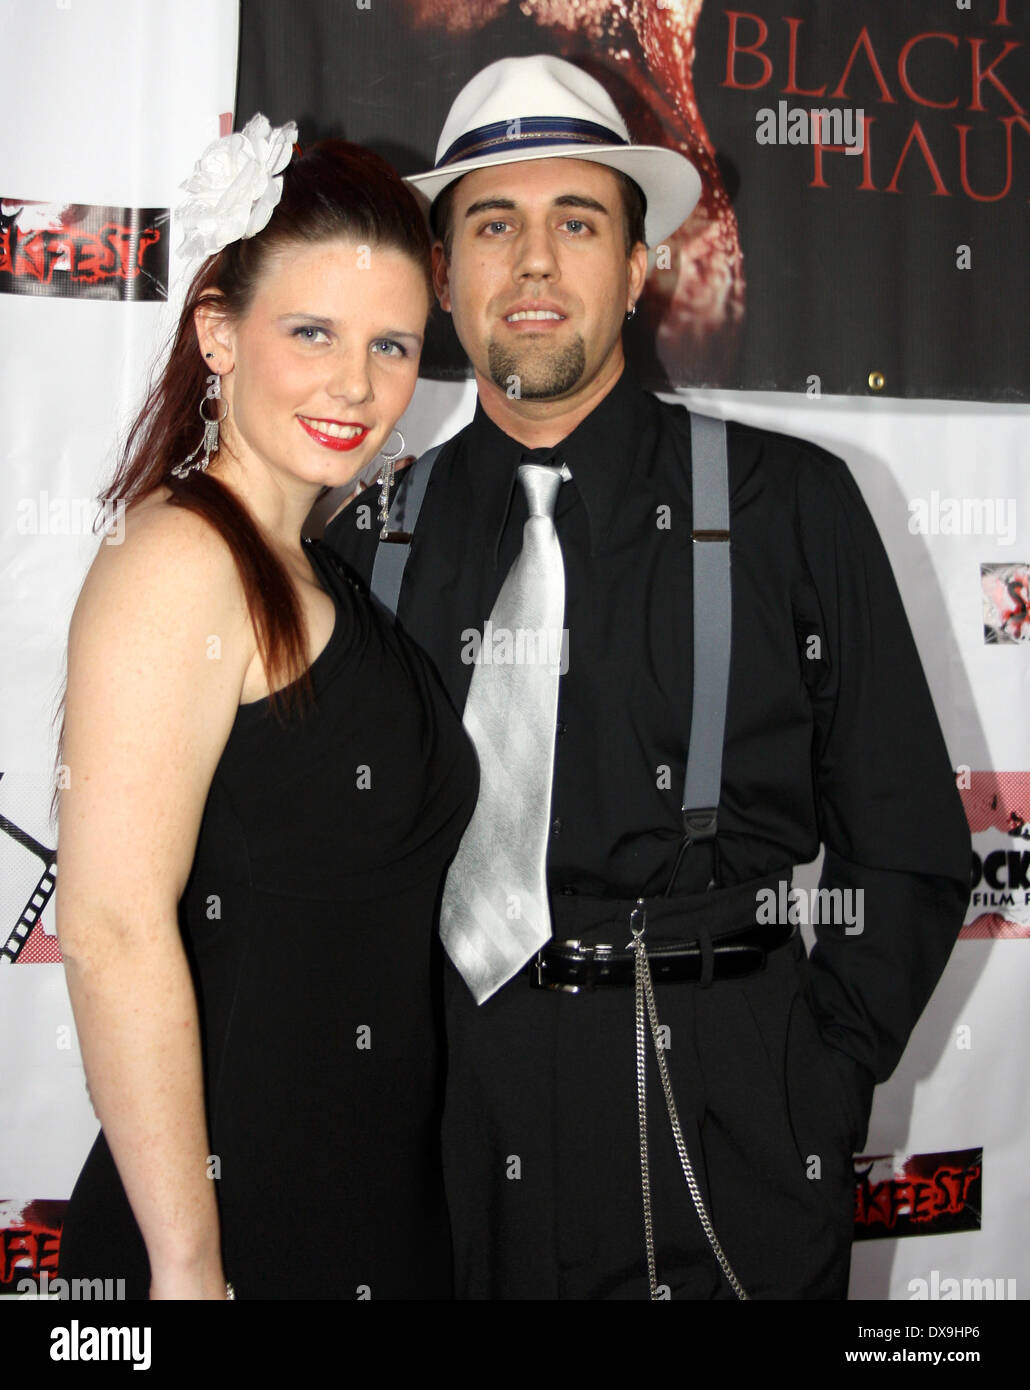 Brooke Cook, Ace Jordan 6th Annual Shockfest Film Festival of Hollywood  Opening - Arrivals Los Angeles, California - 16.11.12 Cr Stock Photo - Alamy